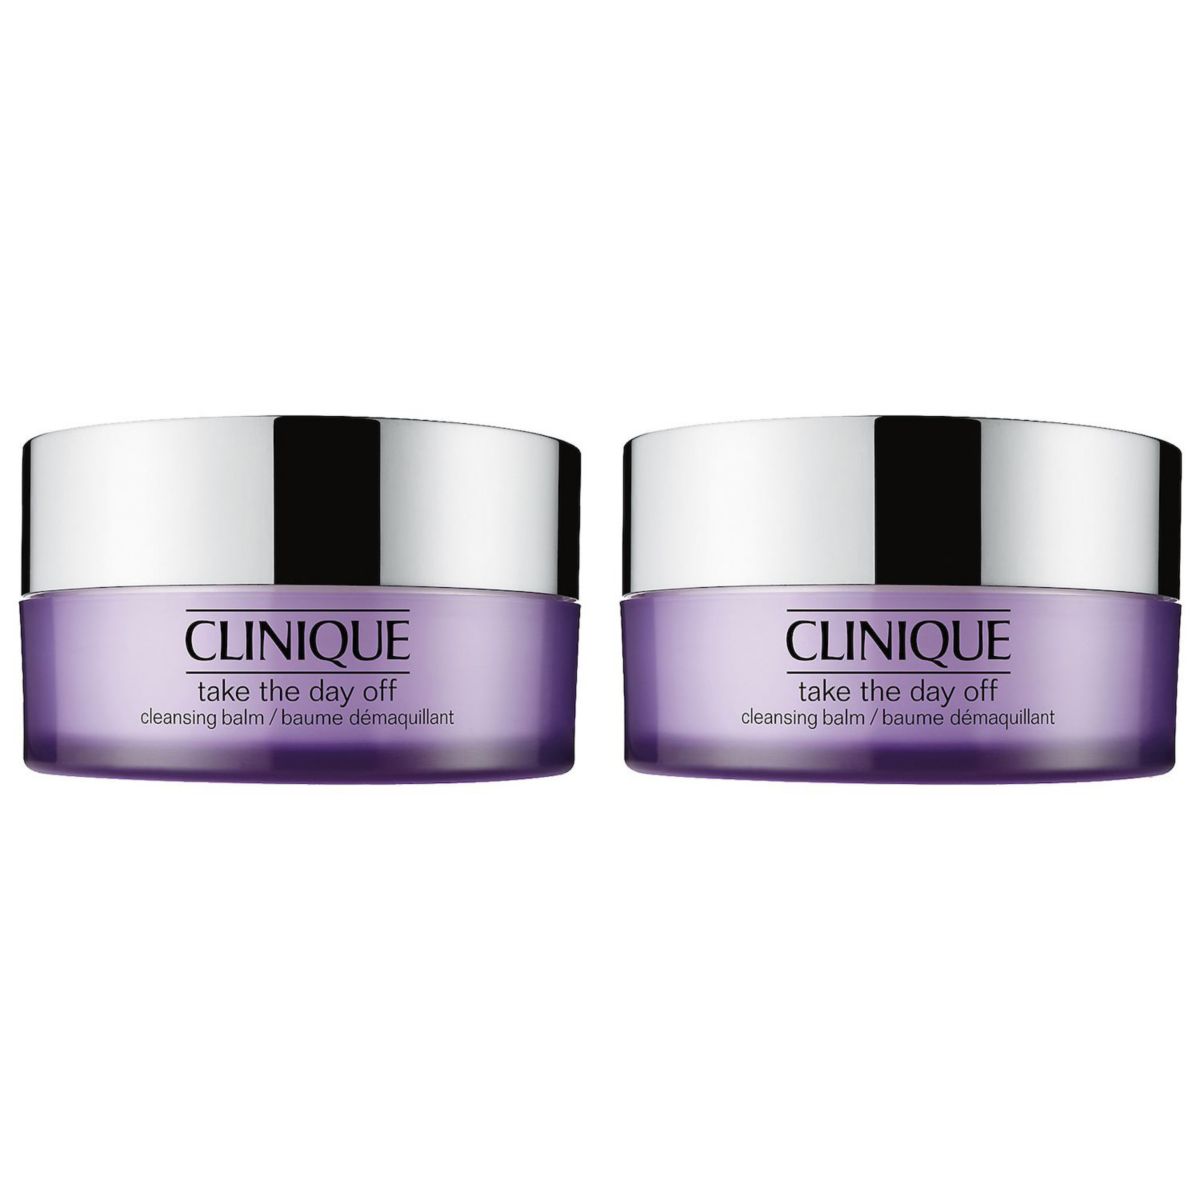 Clinique take the Day off Cleansing Balm. Clinique take the Day off Cleansing Balm Baume Demaquillant. Clinique take the Day off бальзам. Clinique take the Day off Cleansing Balm с углем. Take the day off cleansing